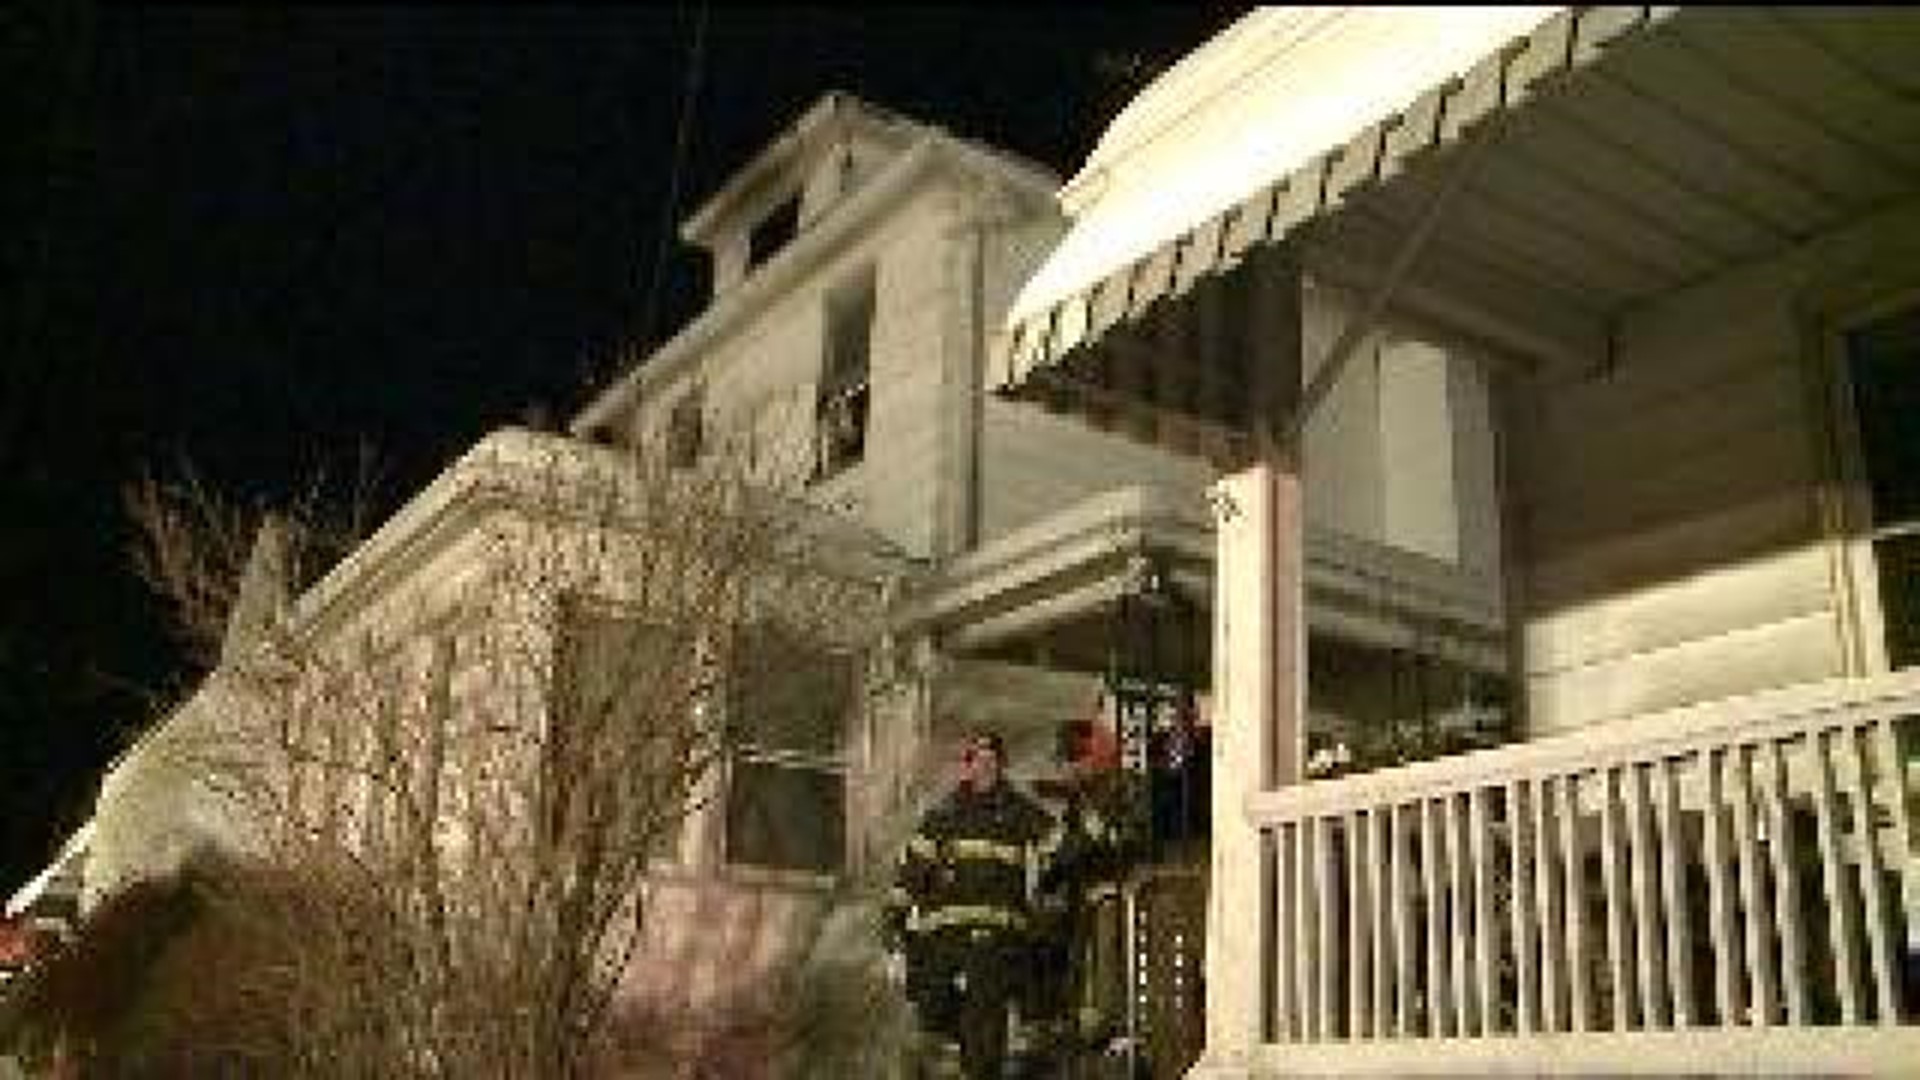 Blow Torch May Have Sparked a House Fire